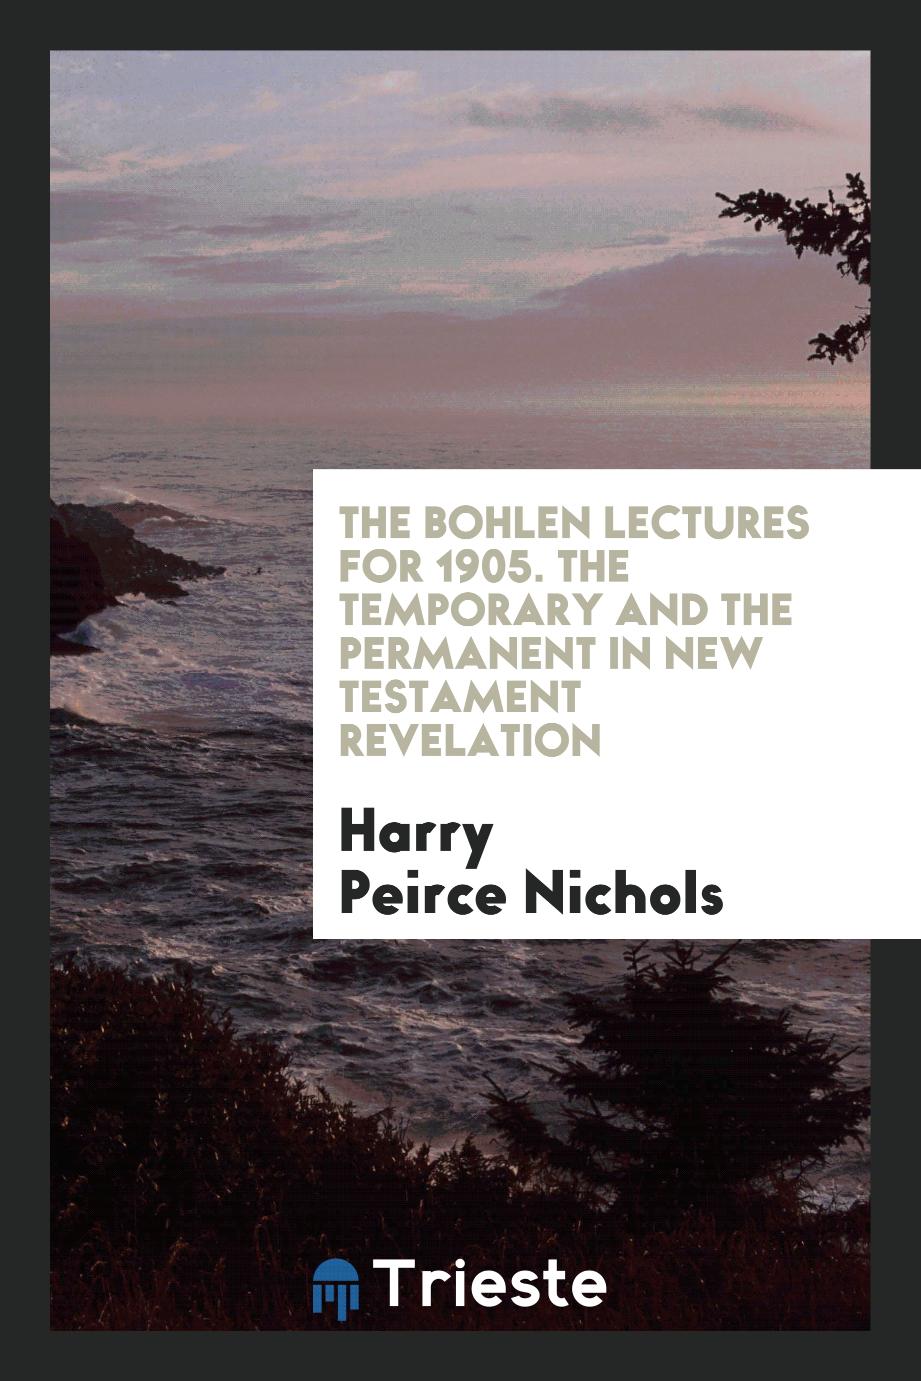 The Bohlen Lectures for 1905. The Temporary and the Permanent in New Testament Revelation